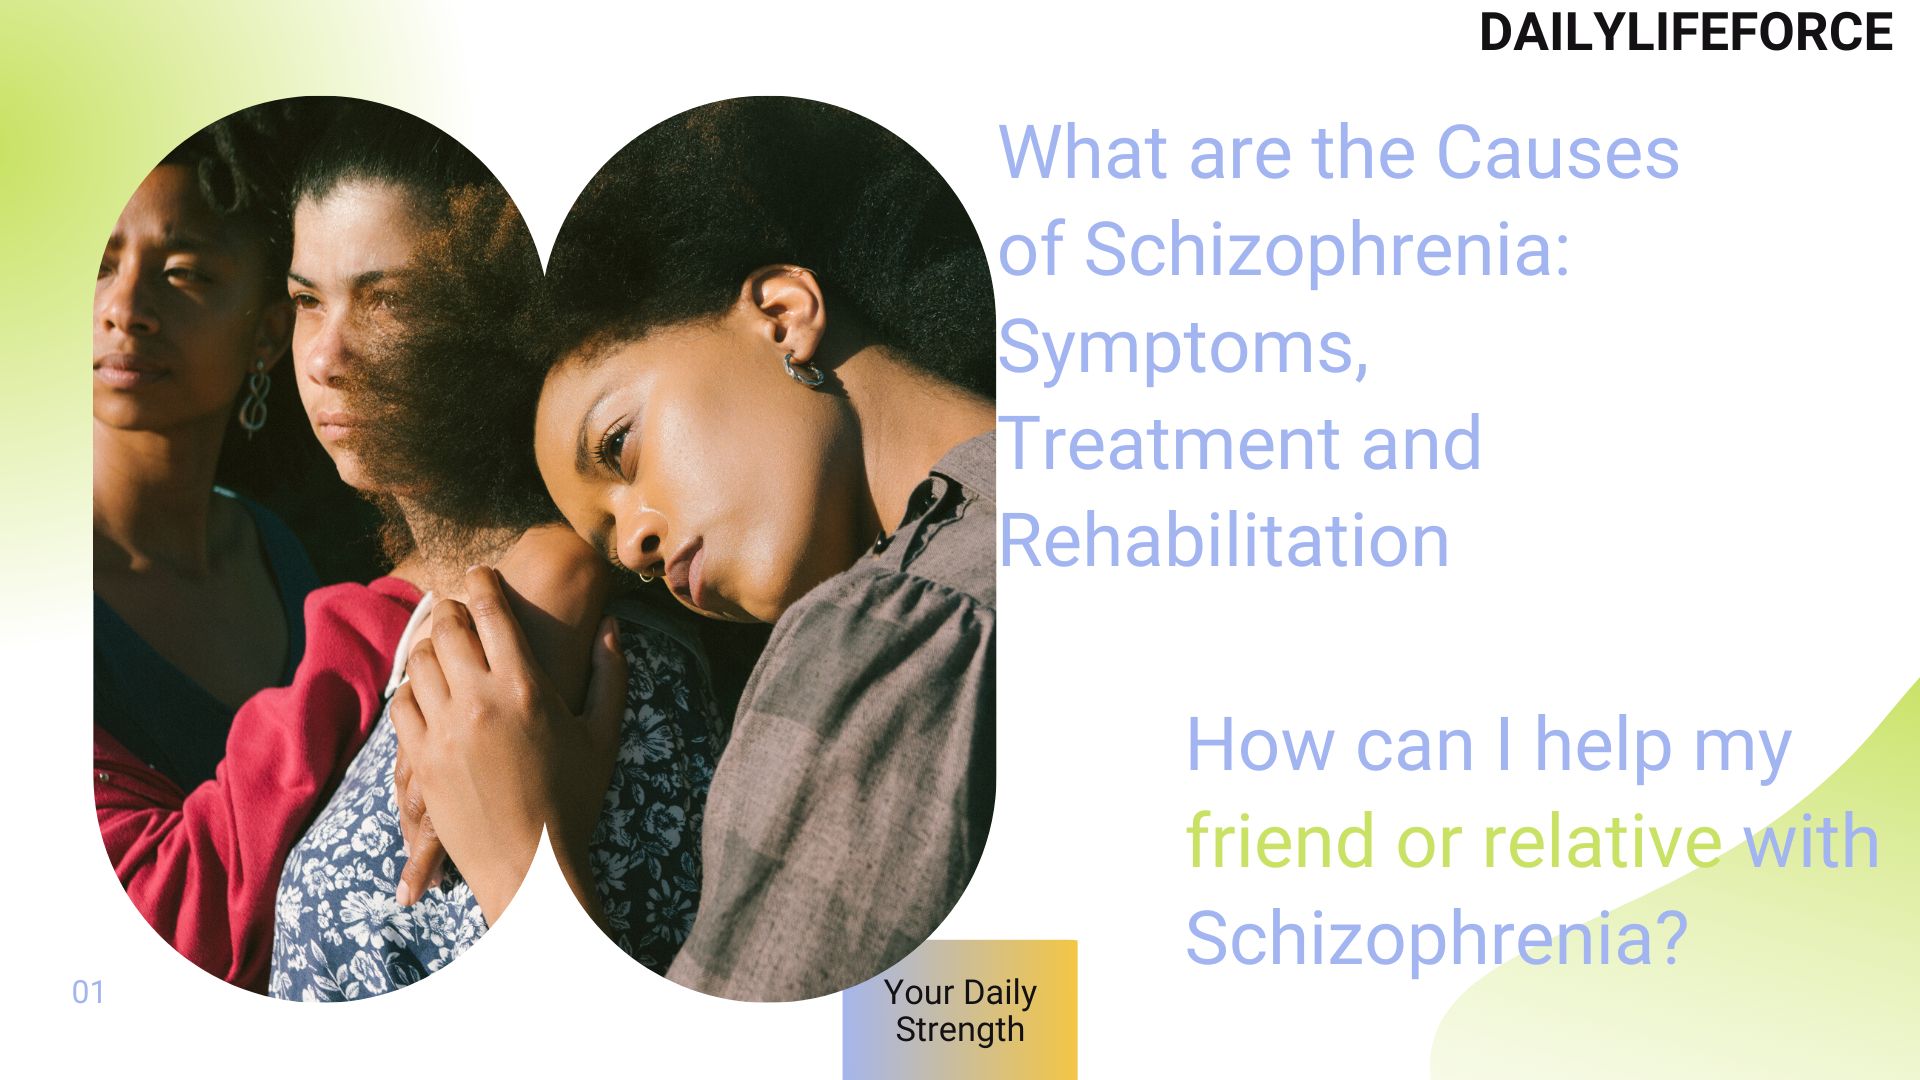 How can I Help My Friend or Relative with Schizophrenia?